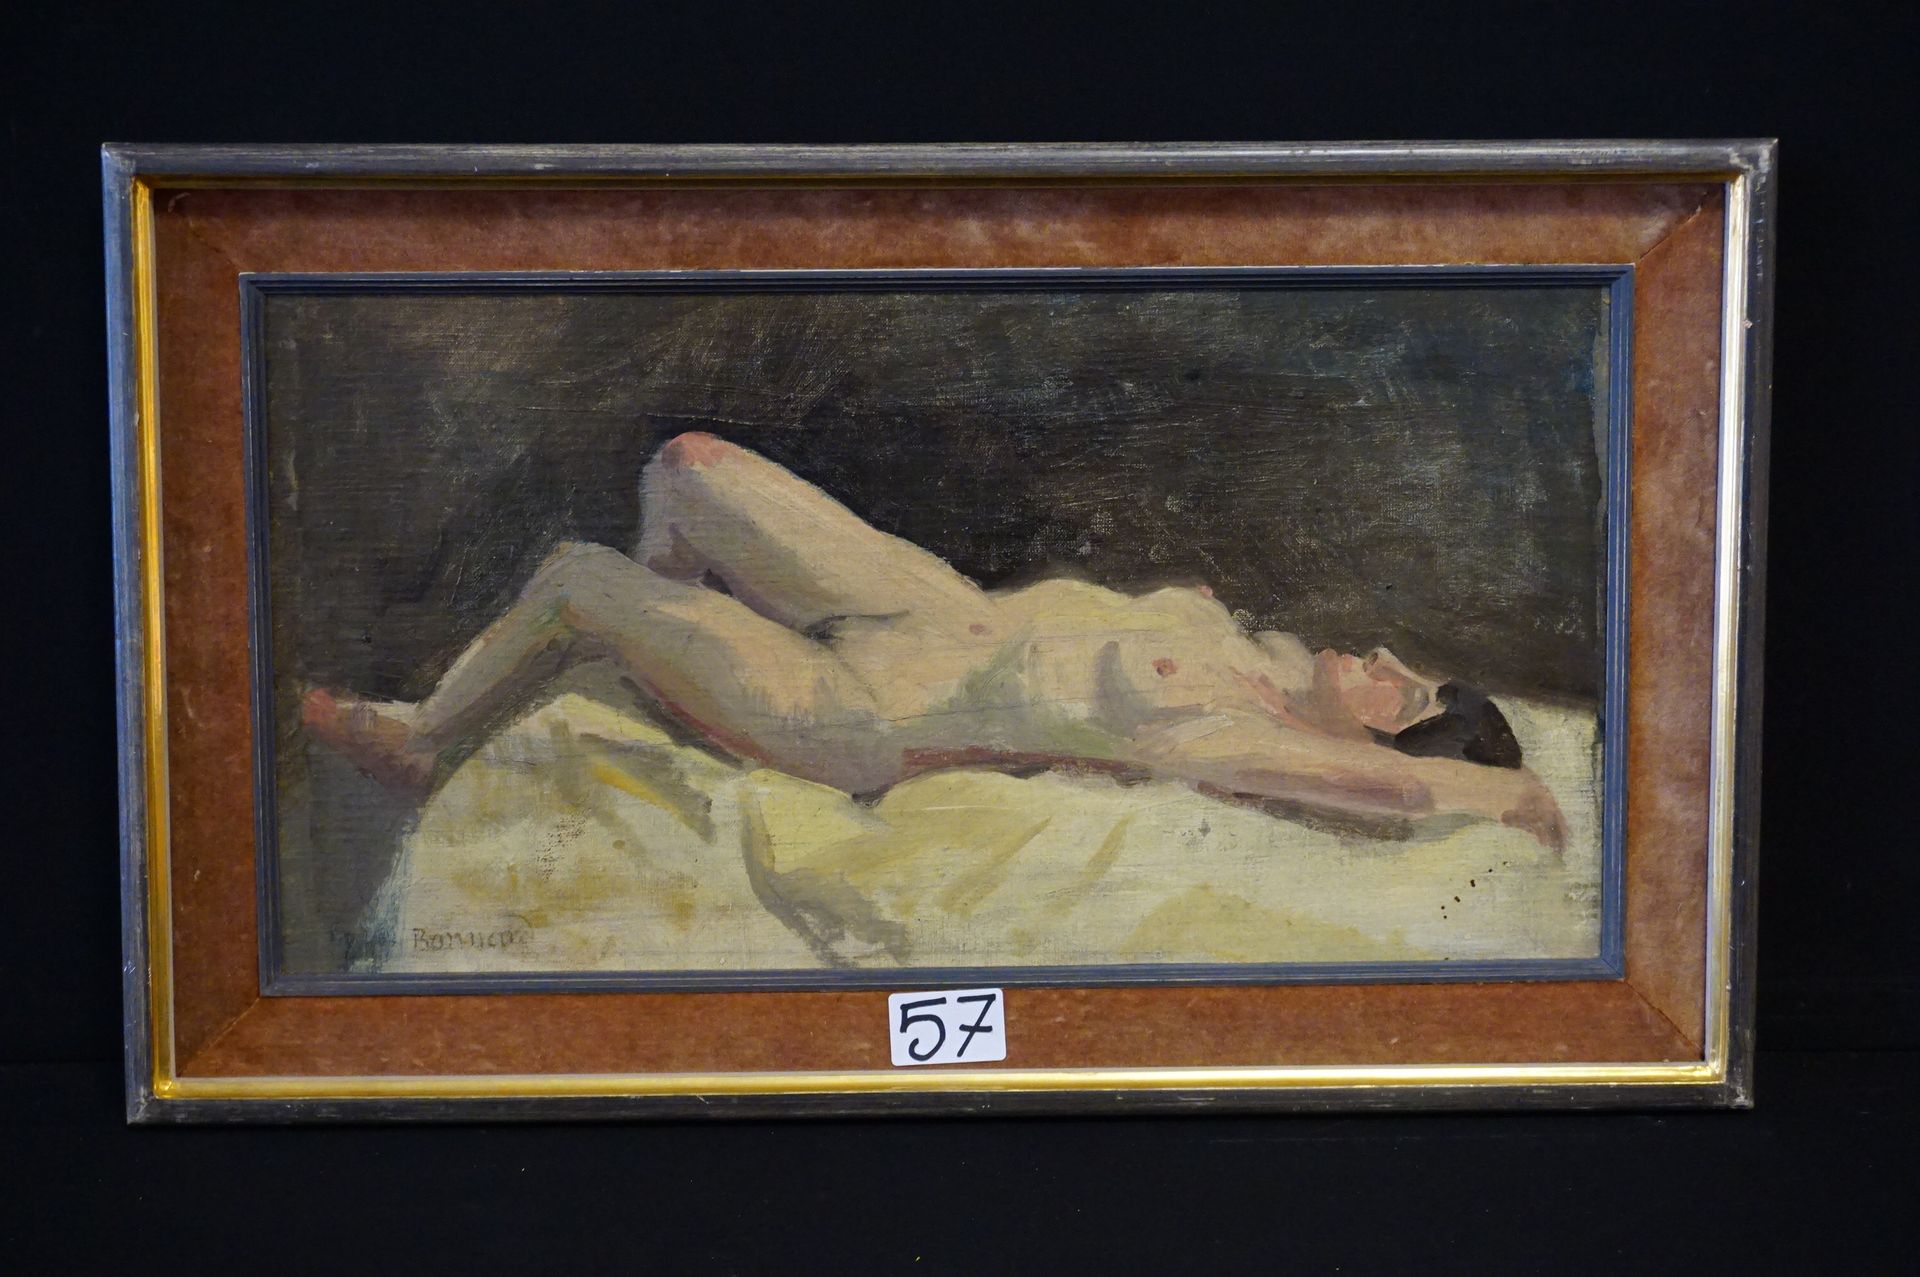 Pierre BONNARD (1867 - 1947) Attributed to - "Reclining Nude" - Oil on panel - S&hellip;